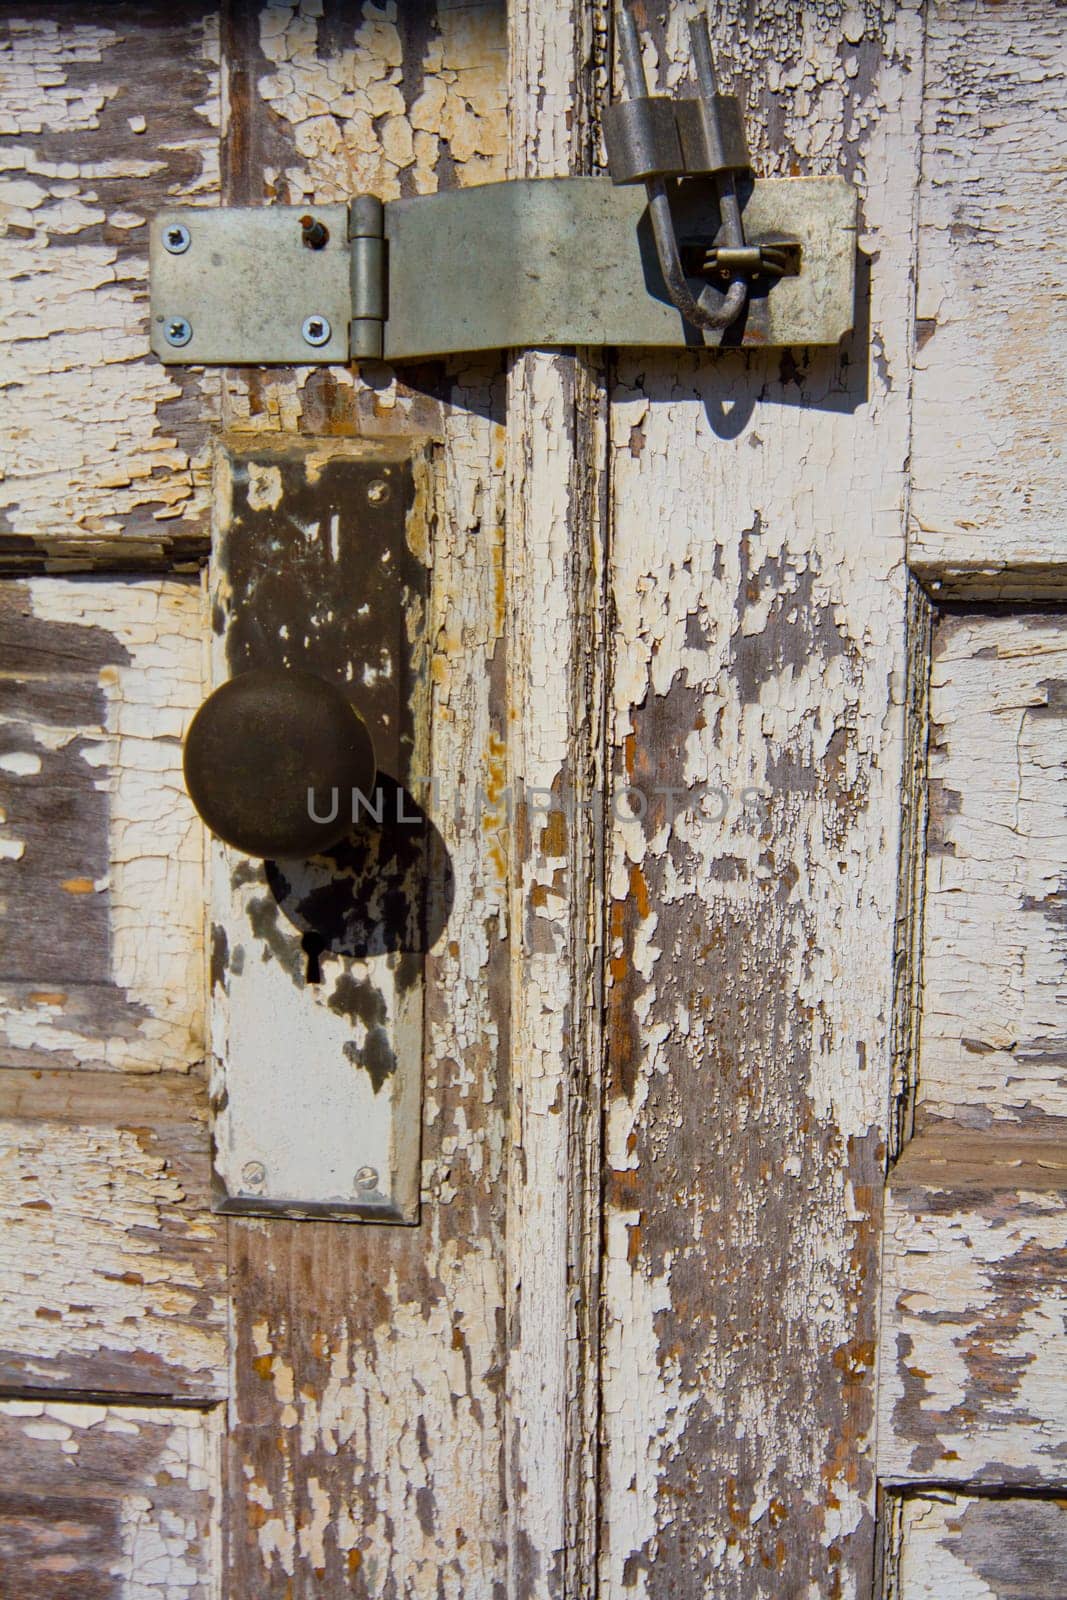 Close-up of Rusty Padlock on Aged Wooden Door at Abandoned Auburn Electric Station, Indiana - A Study in Texture, Decay and Time. Chipped white paint on wooden door.